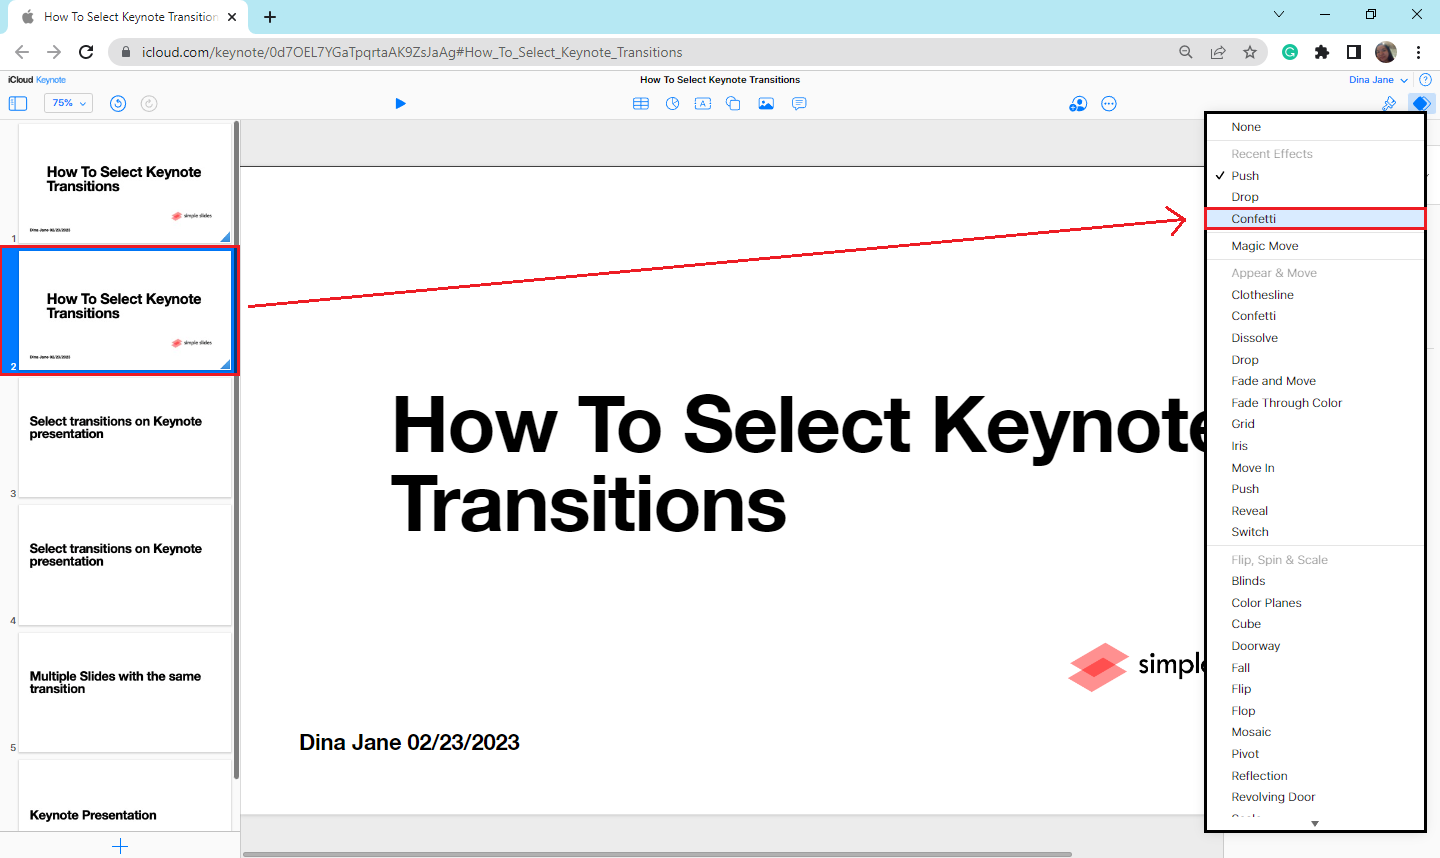 Click another transition you want to apply on your Keynote Slide. E.g,. magic move